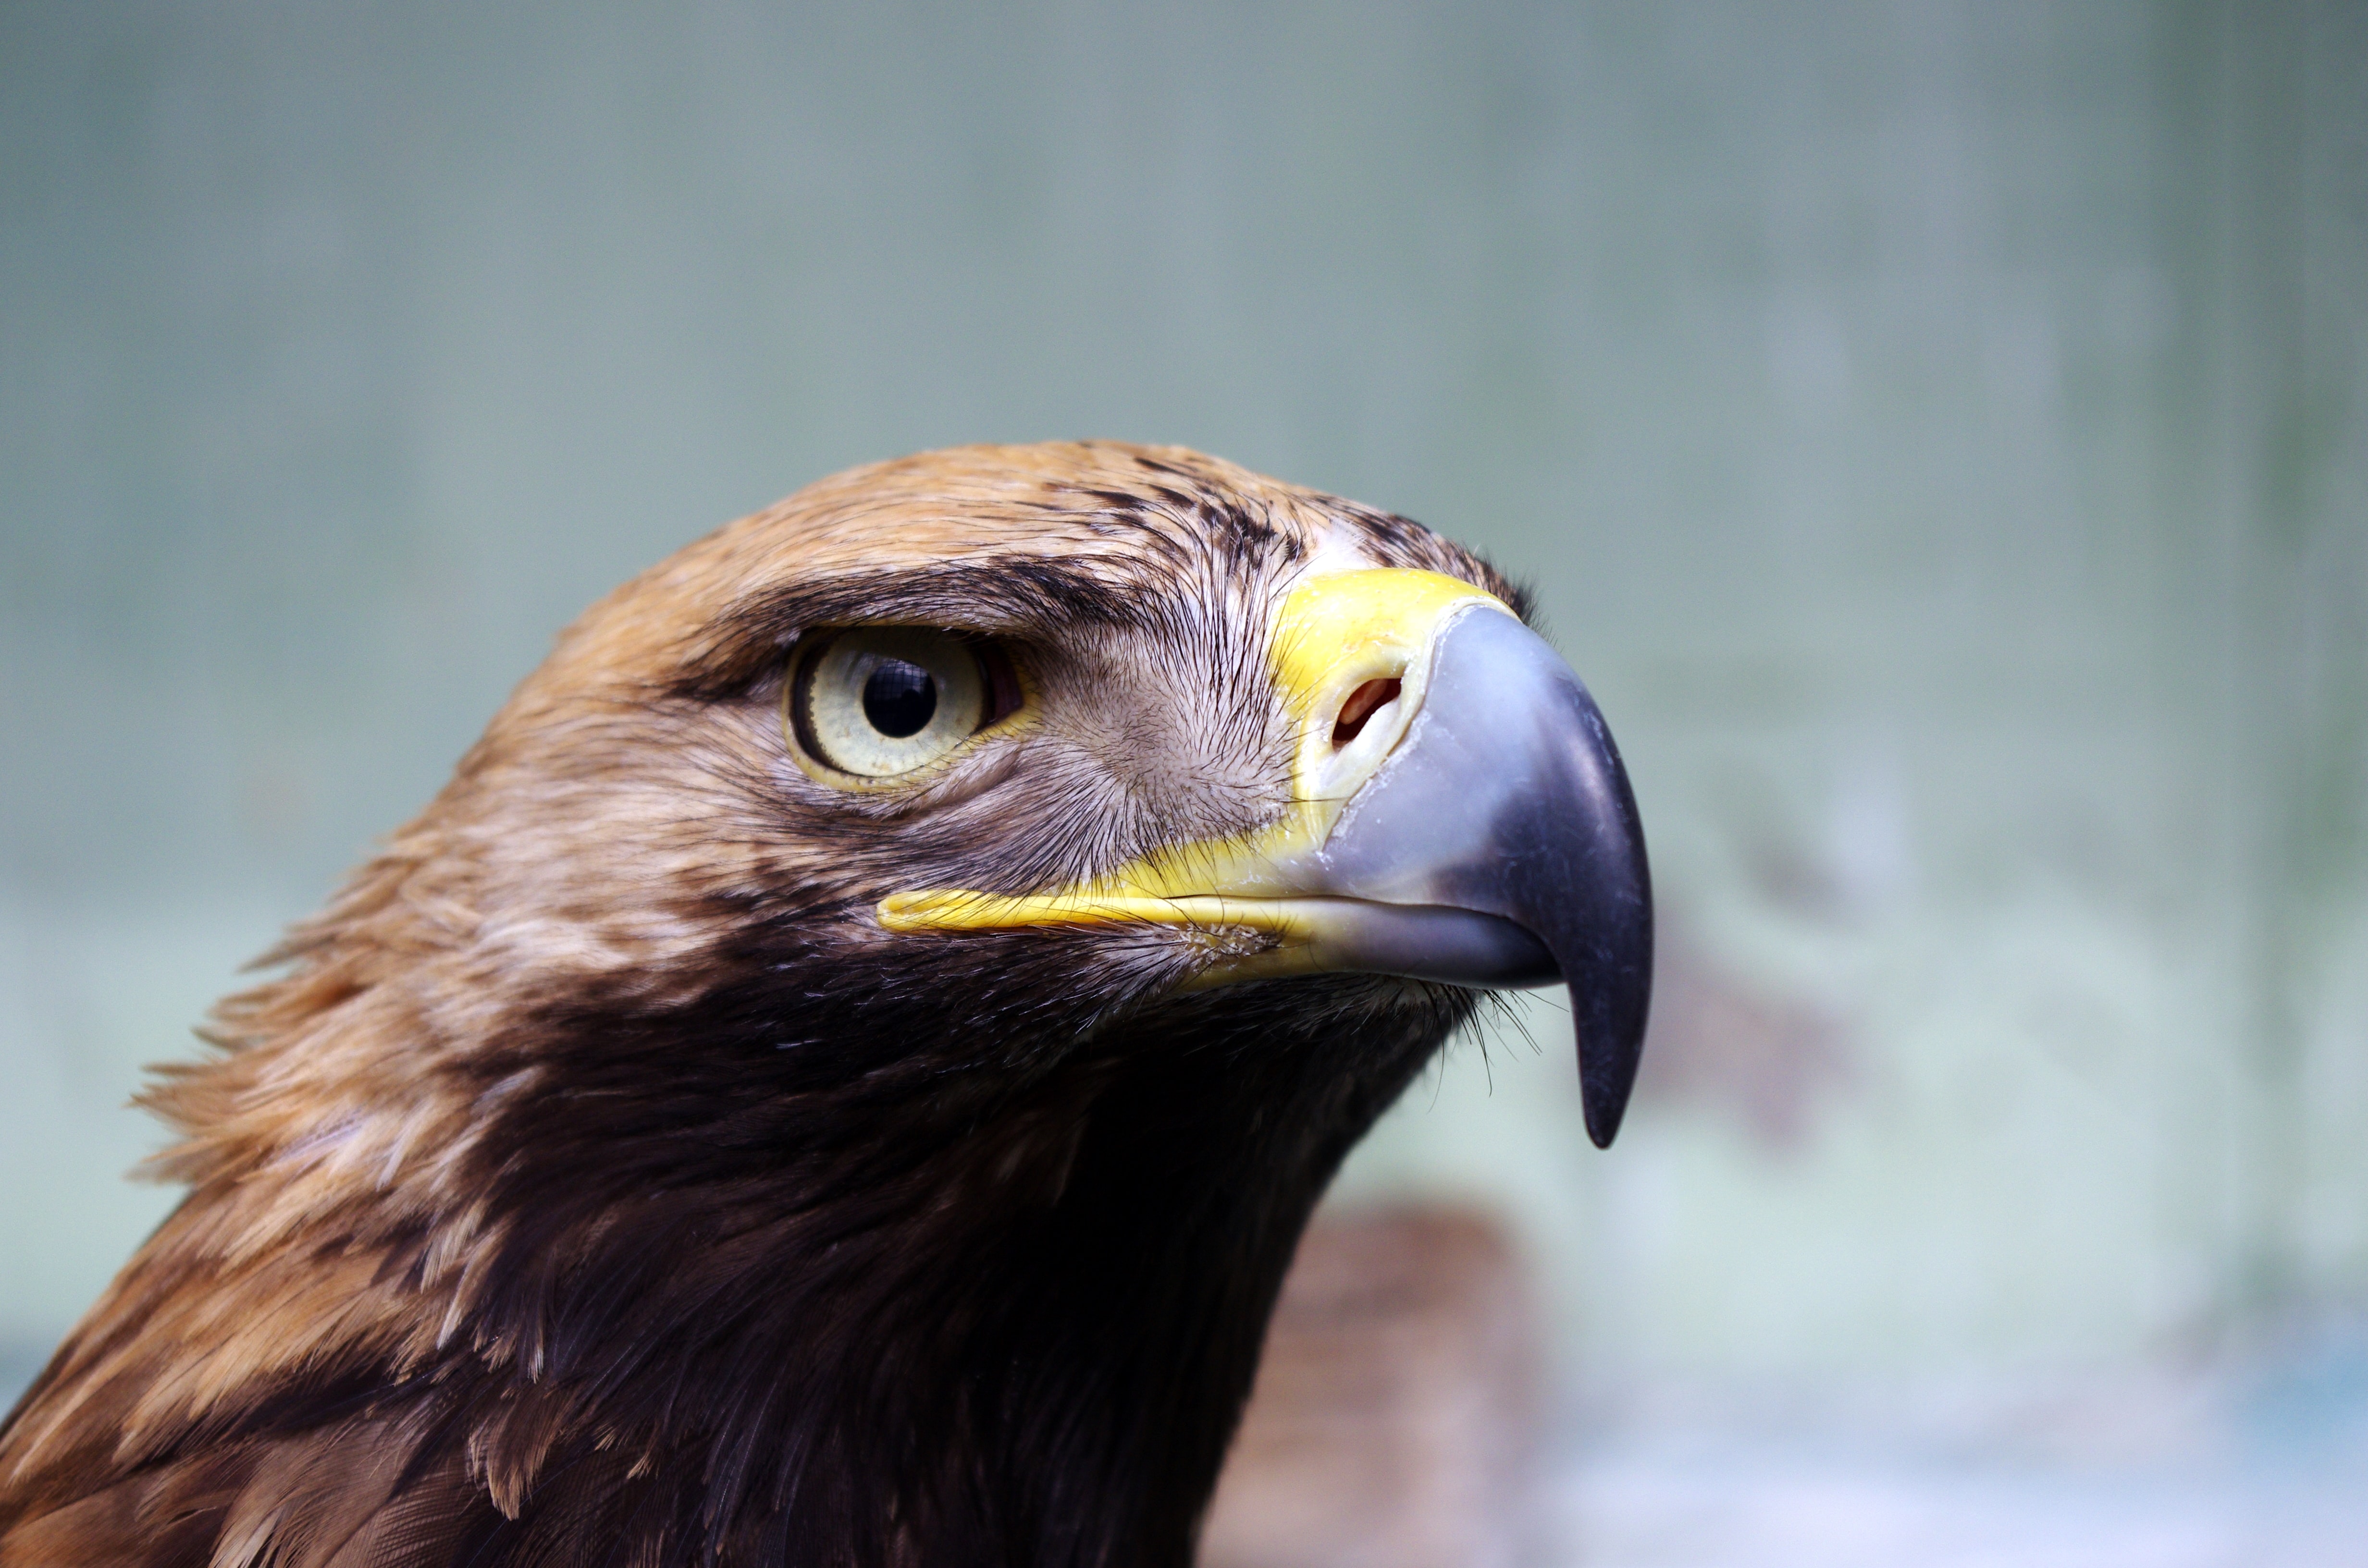 This image shows a eagle